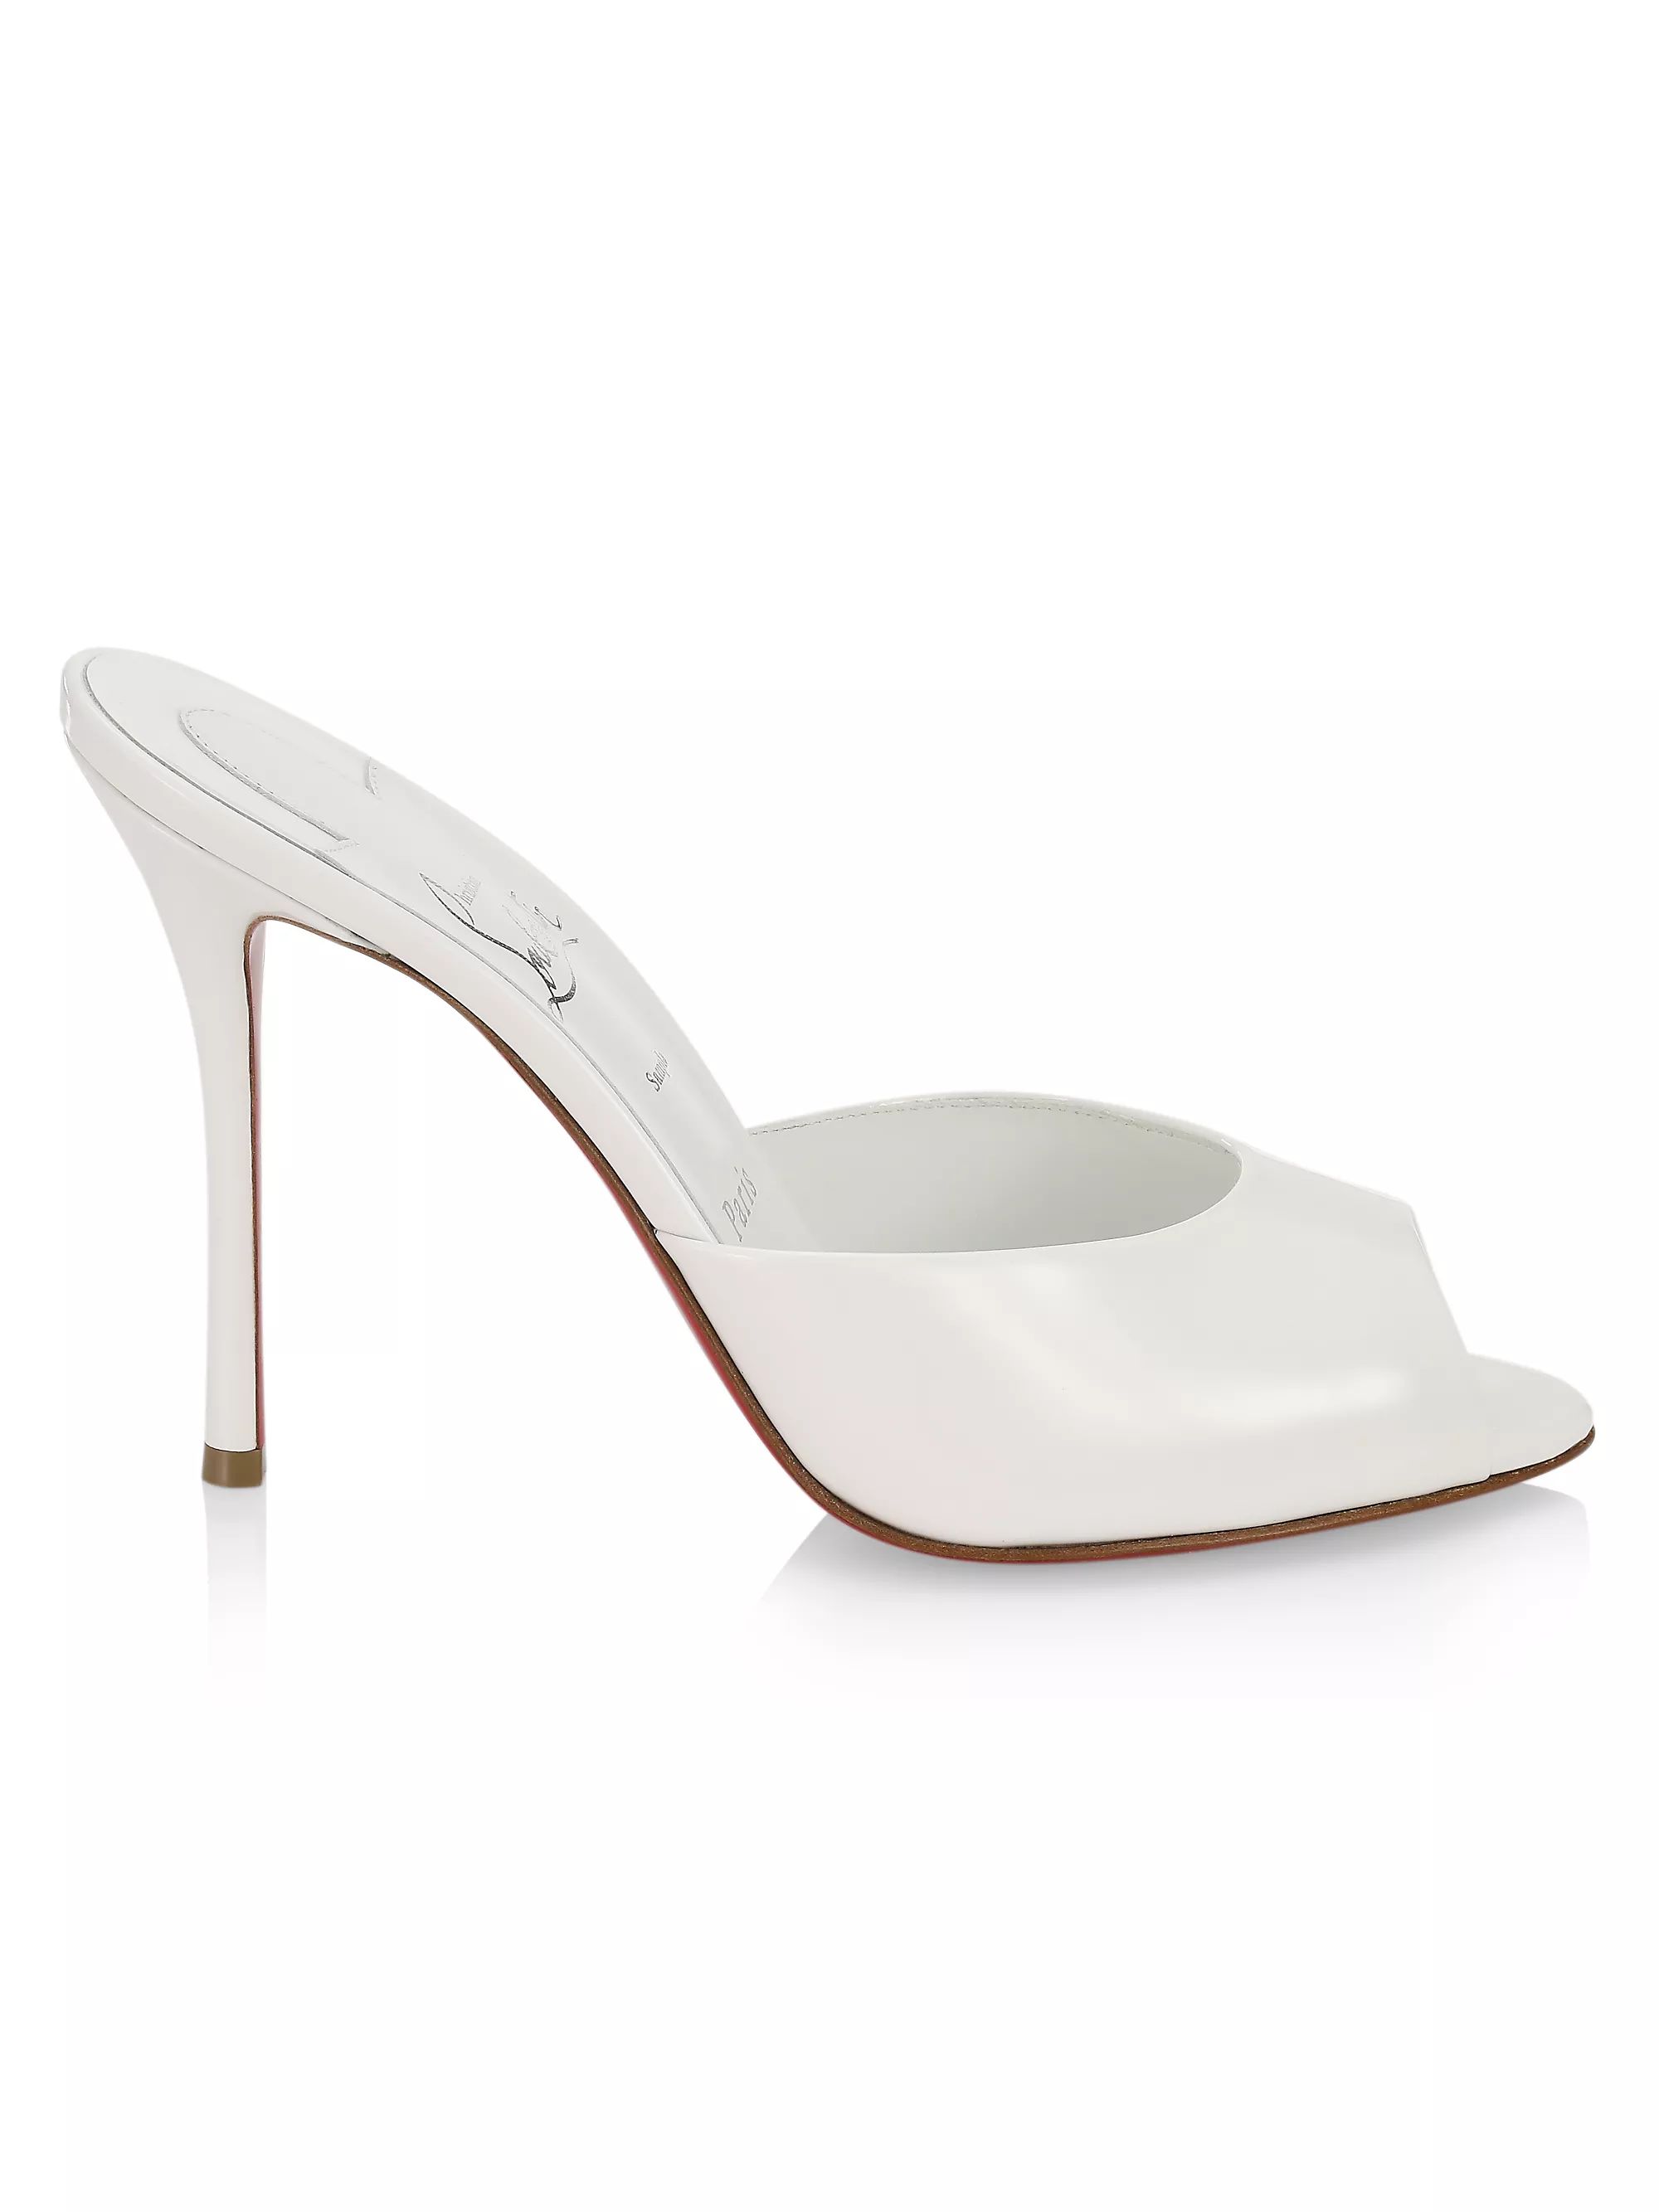 SandalsHeelsChristian LouboutinMe Dolly 100MM Patent Leather Mules$795 | Saks Fifth Avenue